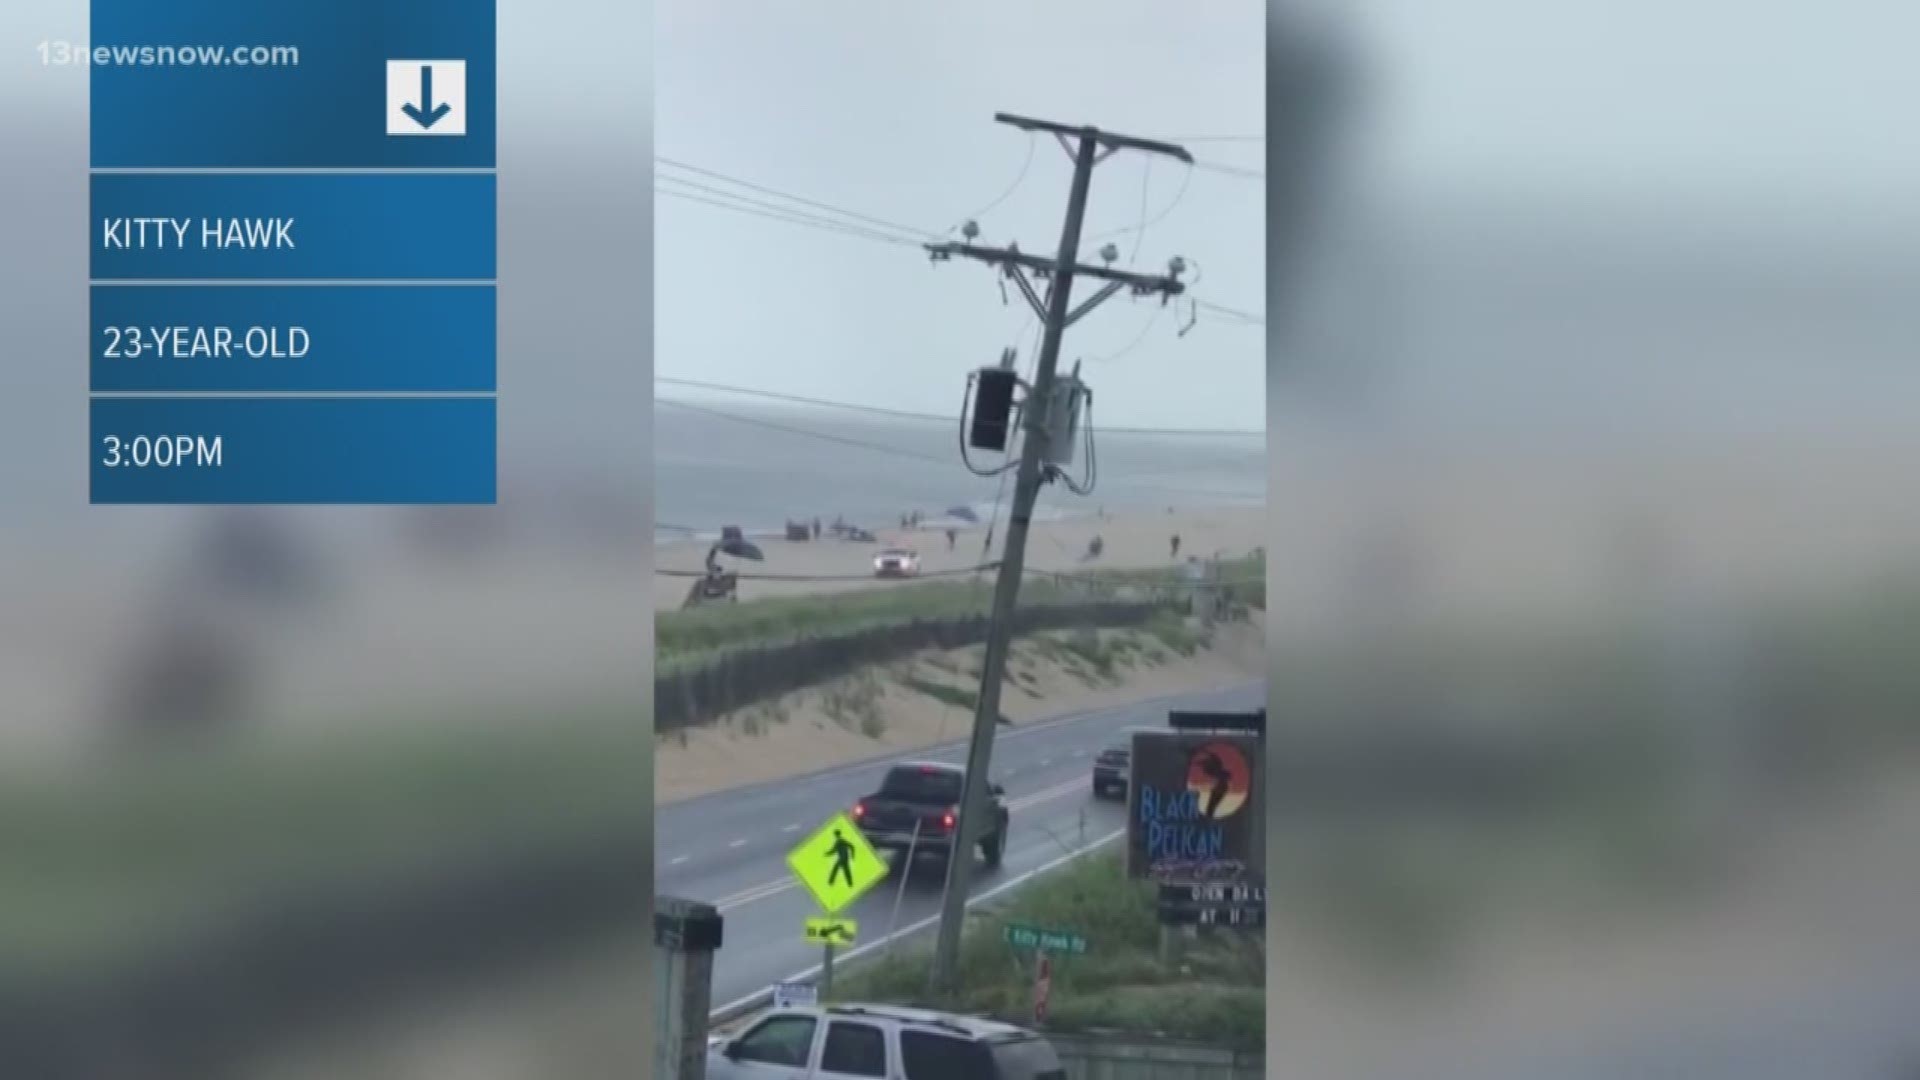 Police said the 23-year-old man was swimming when he was hit by lightning as storms rolled through Kitty Hawk. There is still no word on the man's condition.